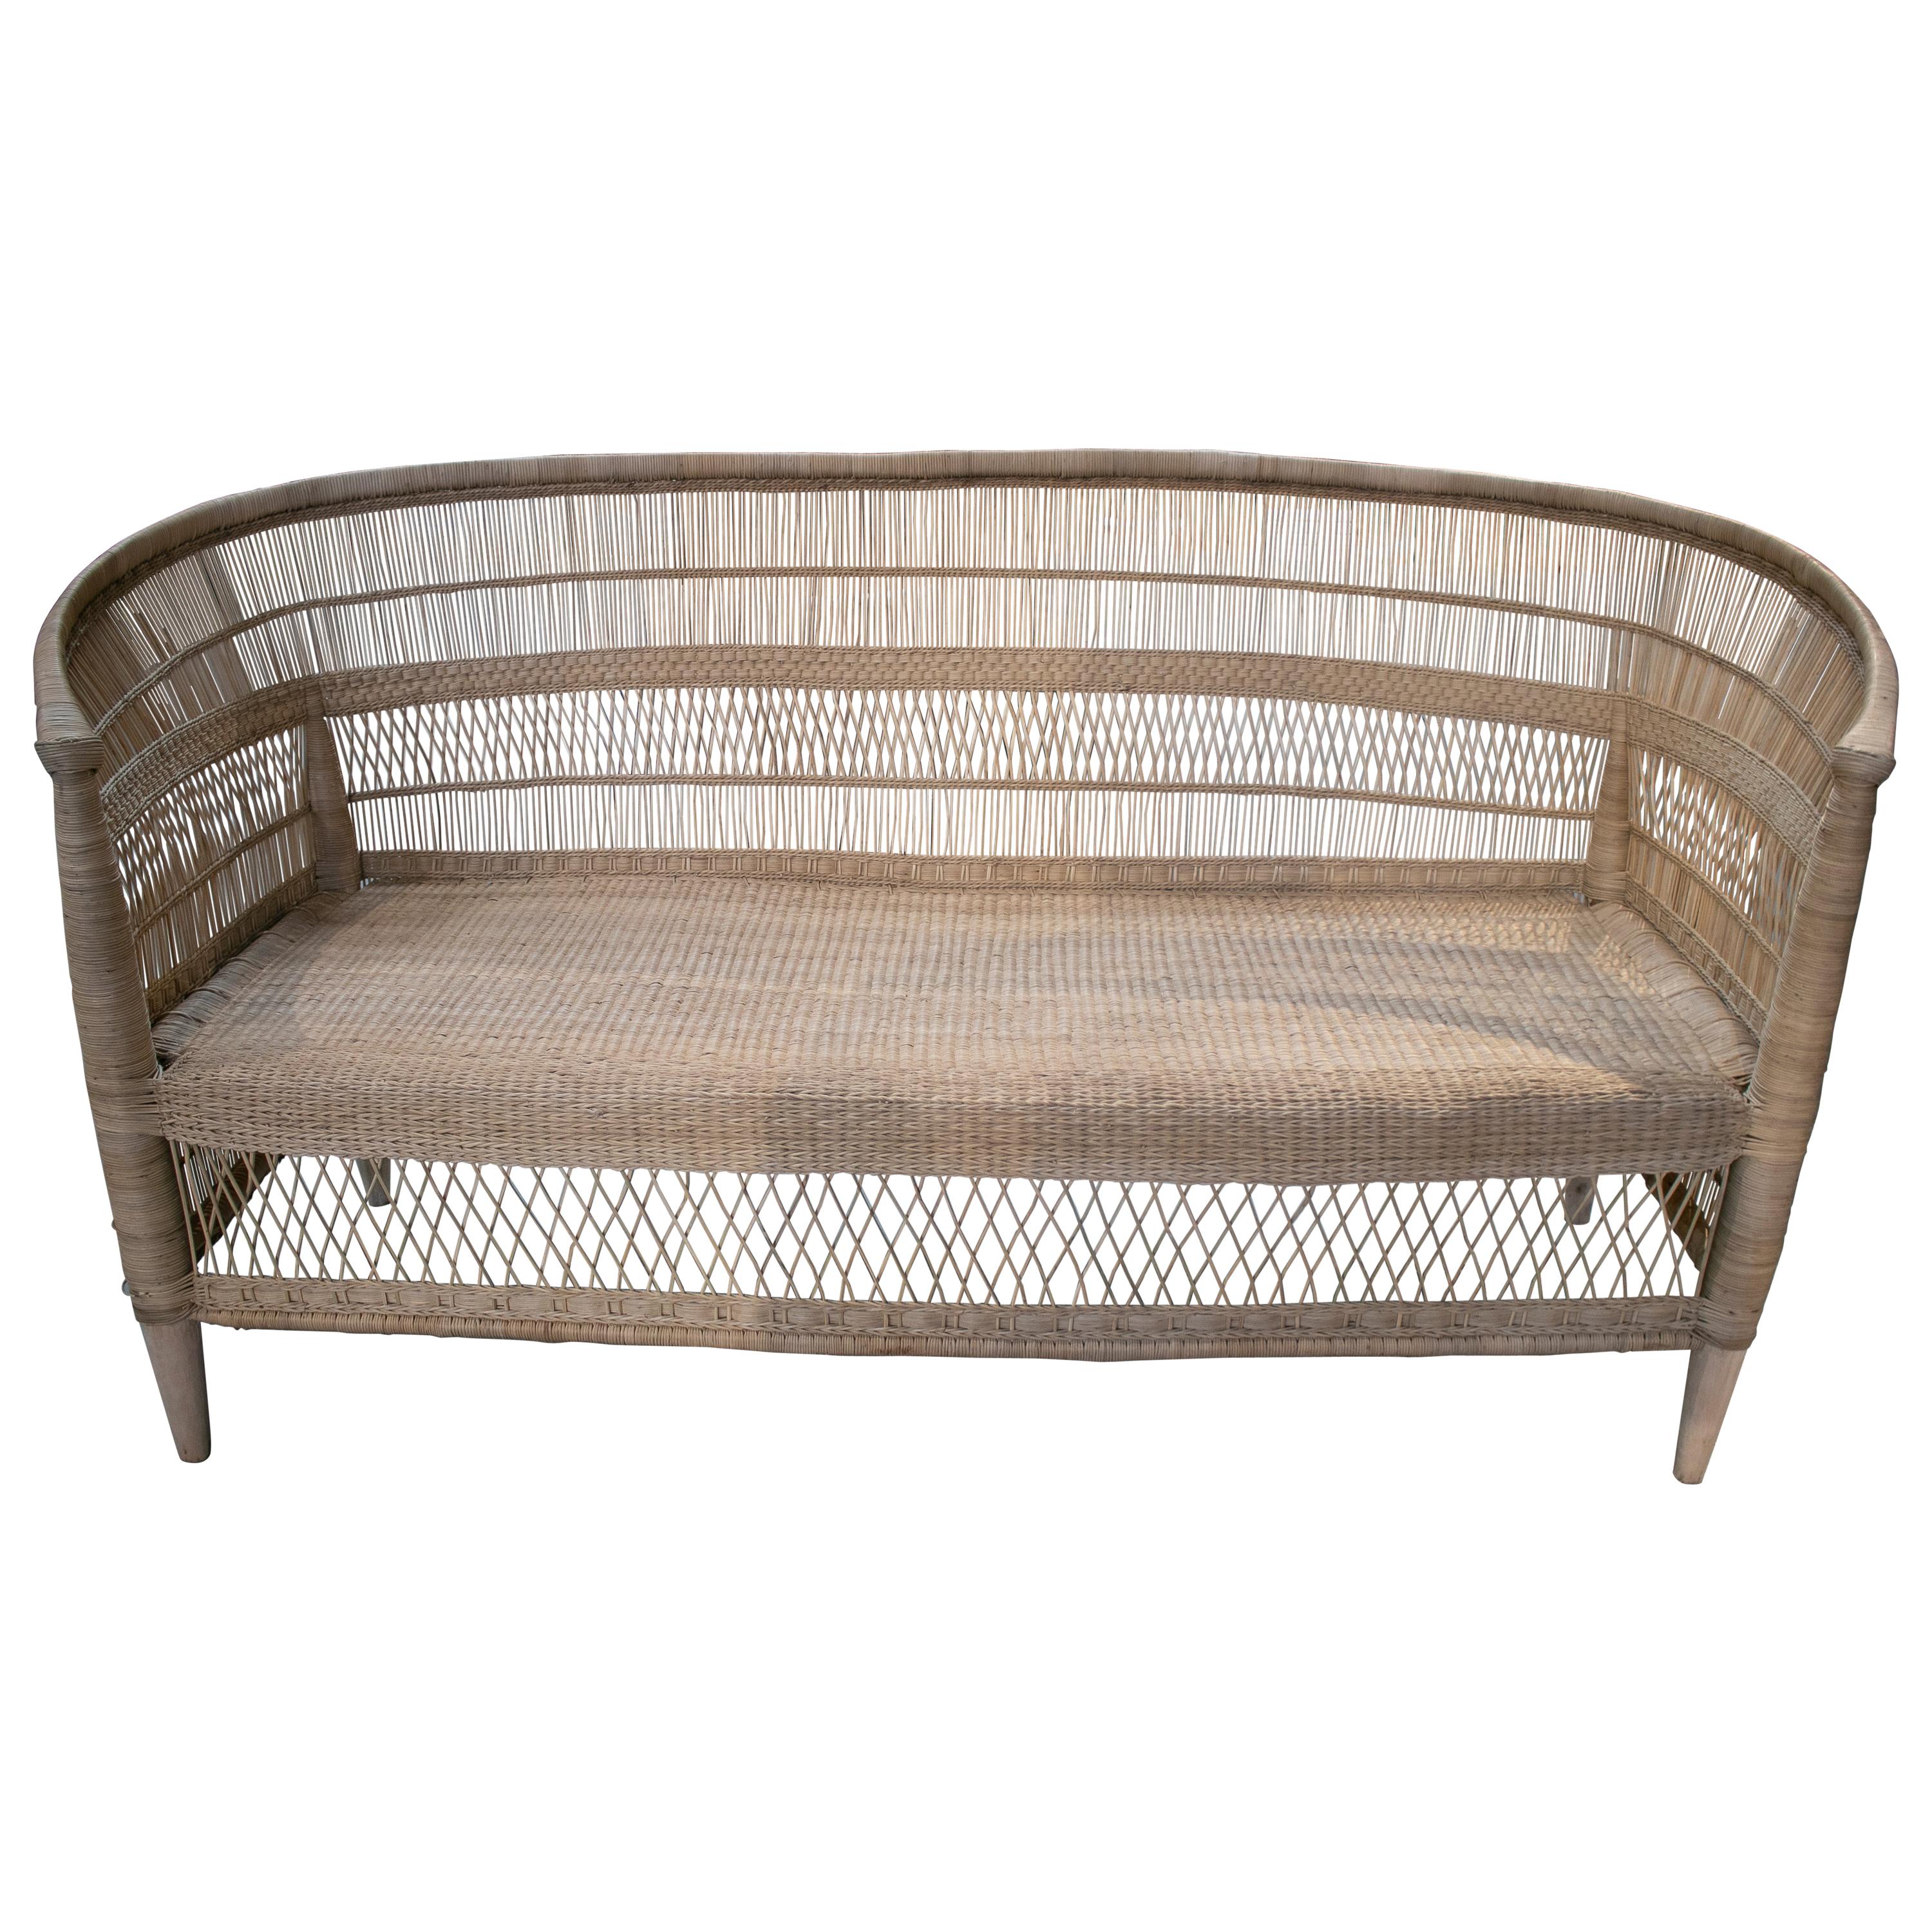 House & Garden Hand Woven Rattan Sofa w/ Wooden Structure For Sale